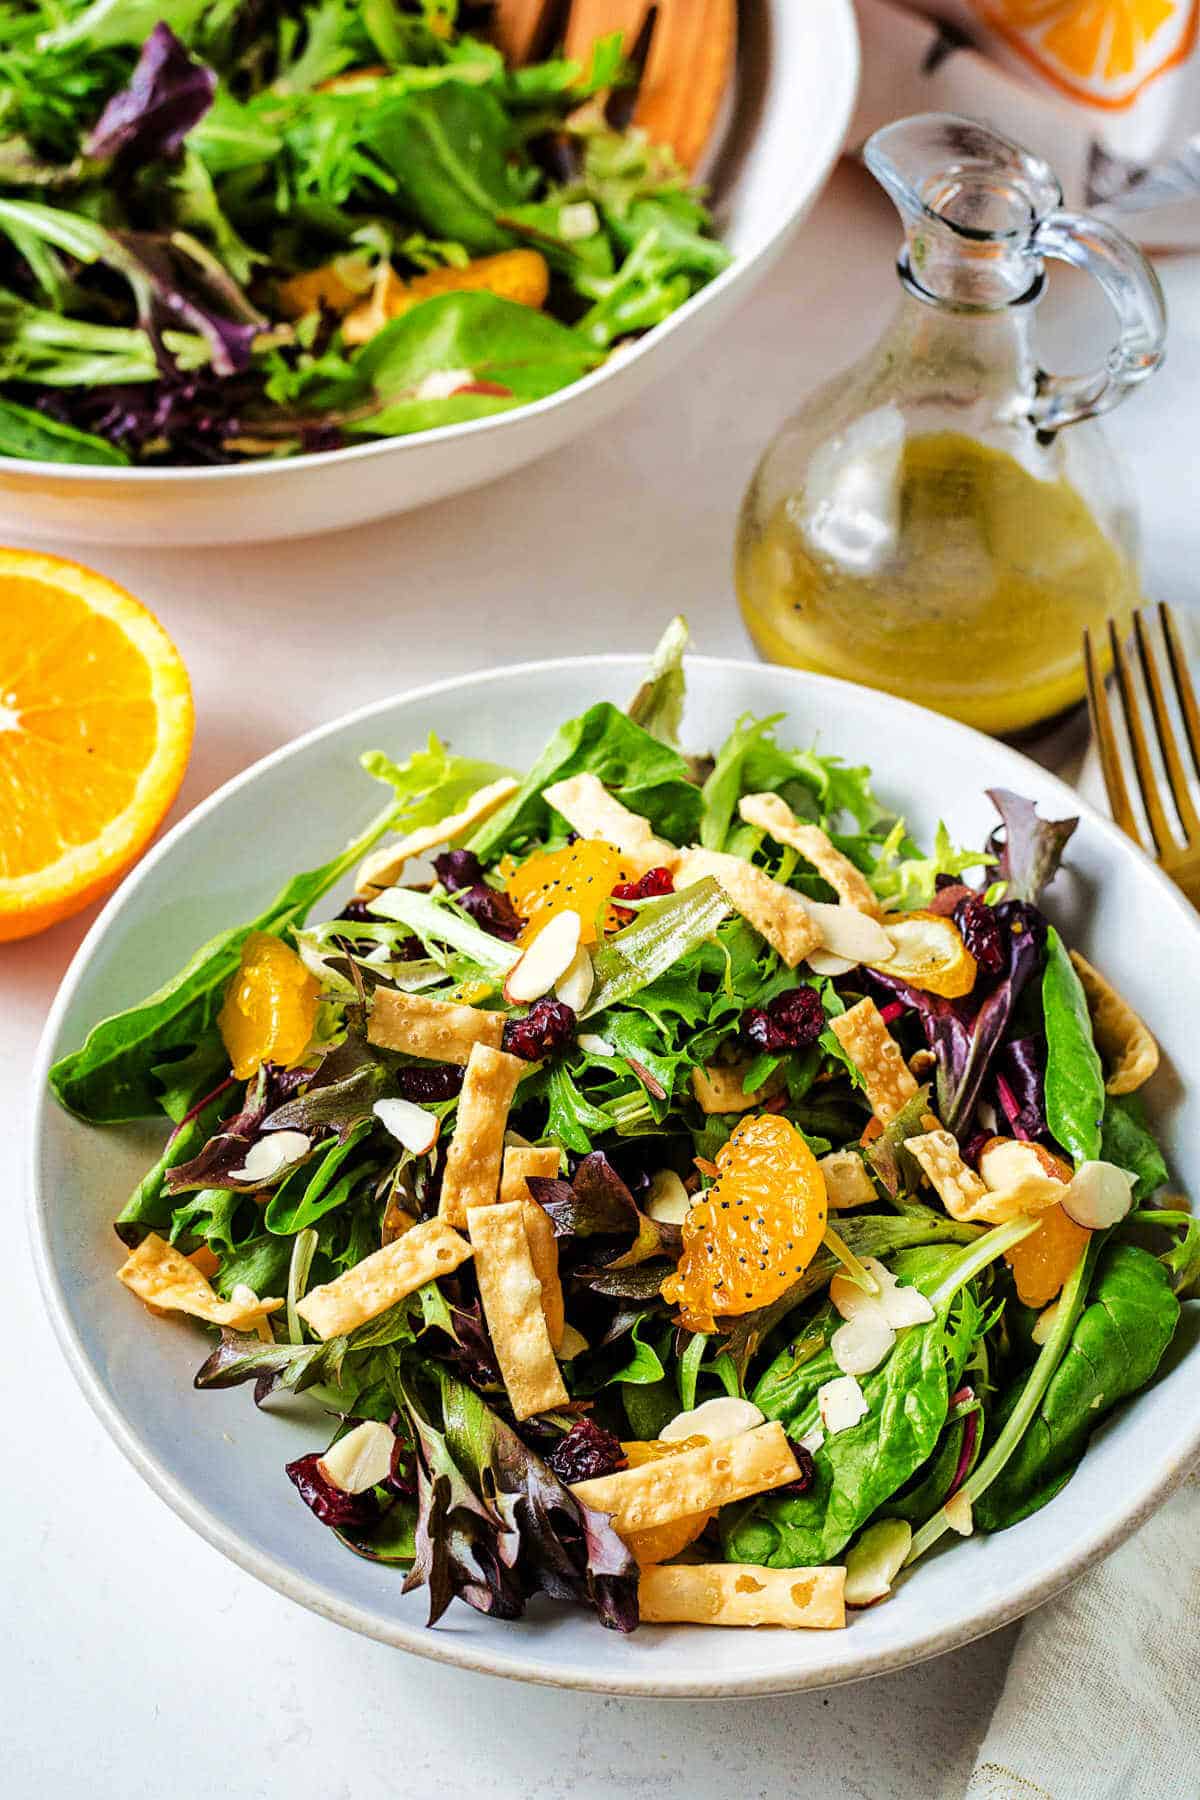 Mandarin orange salad in a serving bowl on a table with a carafe of vinaigrette to the side.